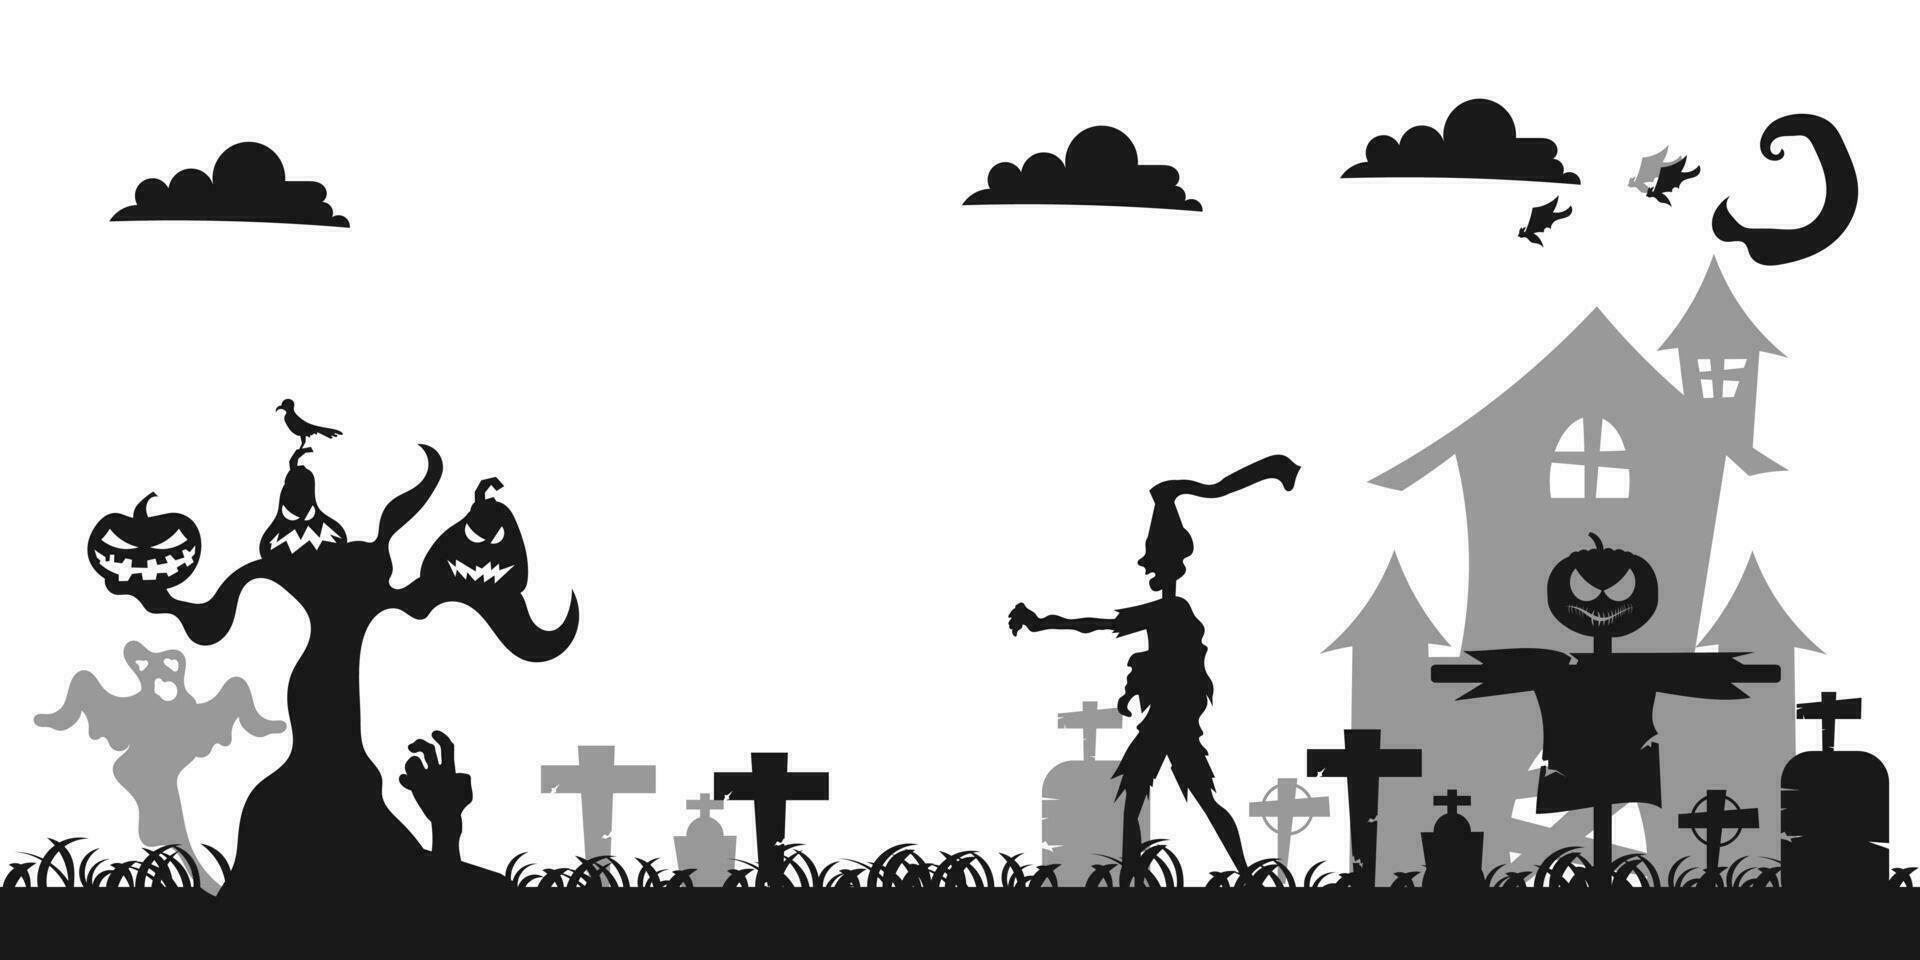 tomb With zombies Vector illustration background